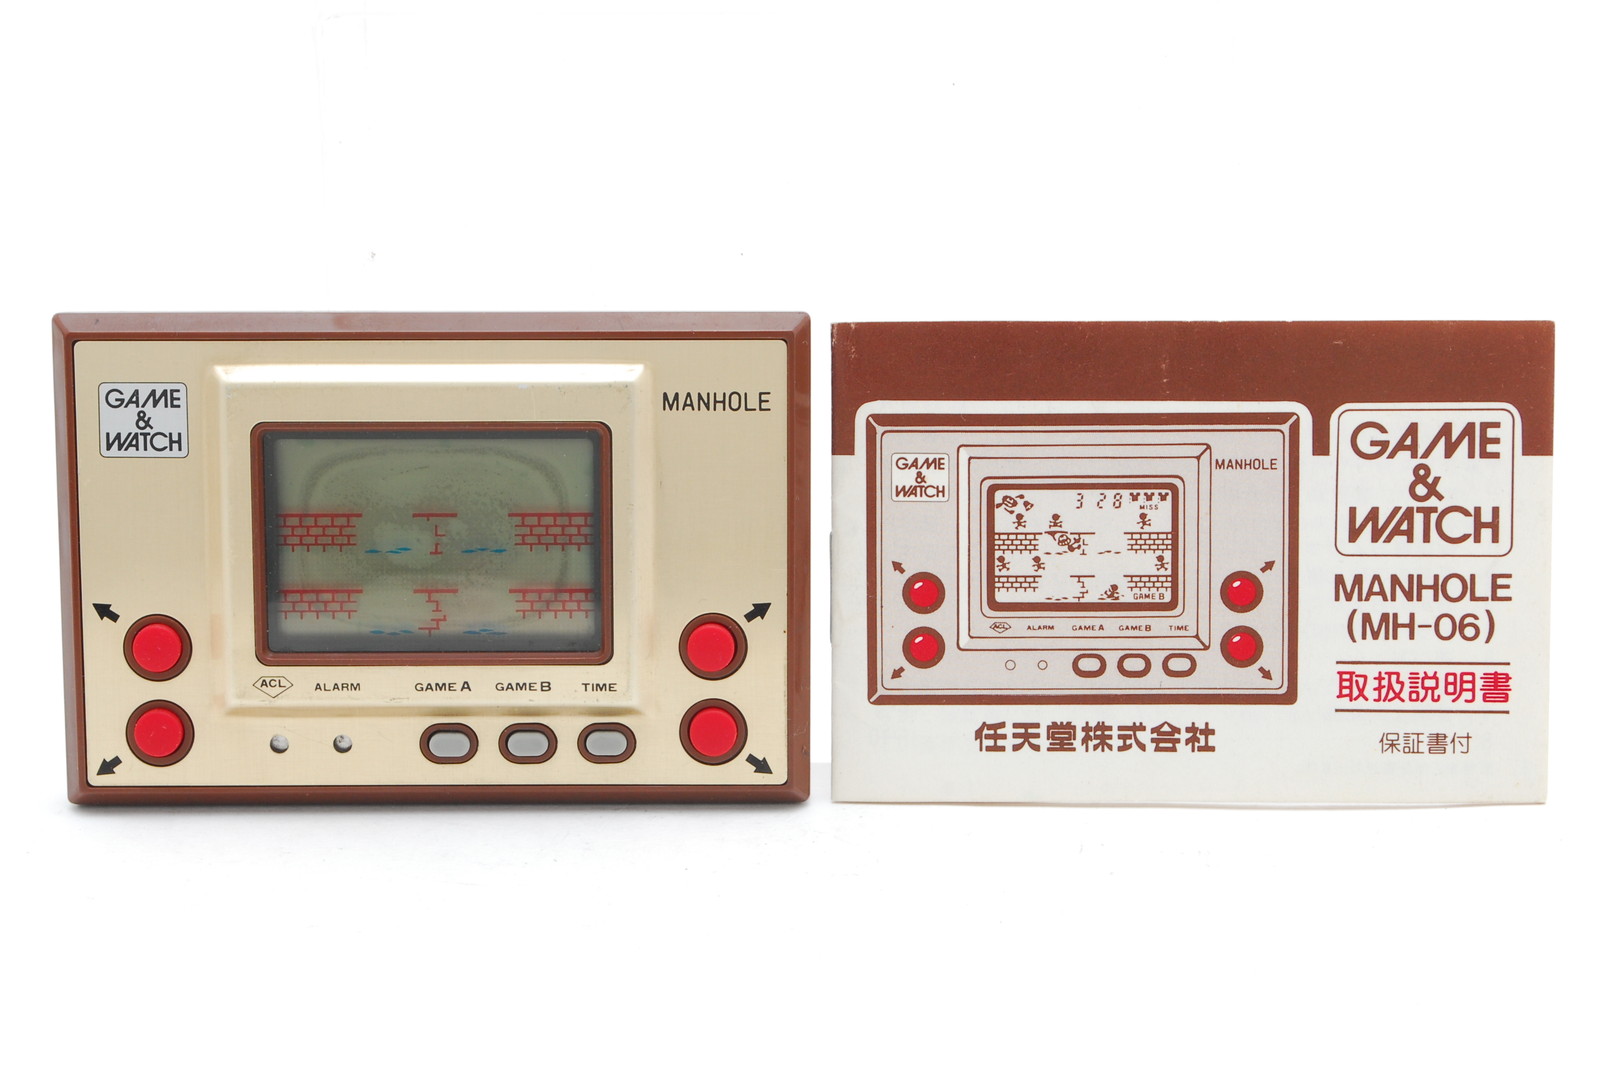 PROMOTION. NEAR MINT Nintendo Game and Watch Manhole MH-06 Vintage Made in 1981, Manual from Japan